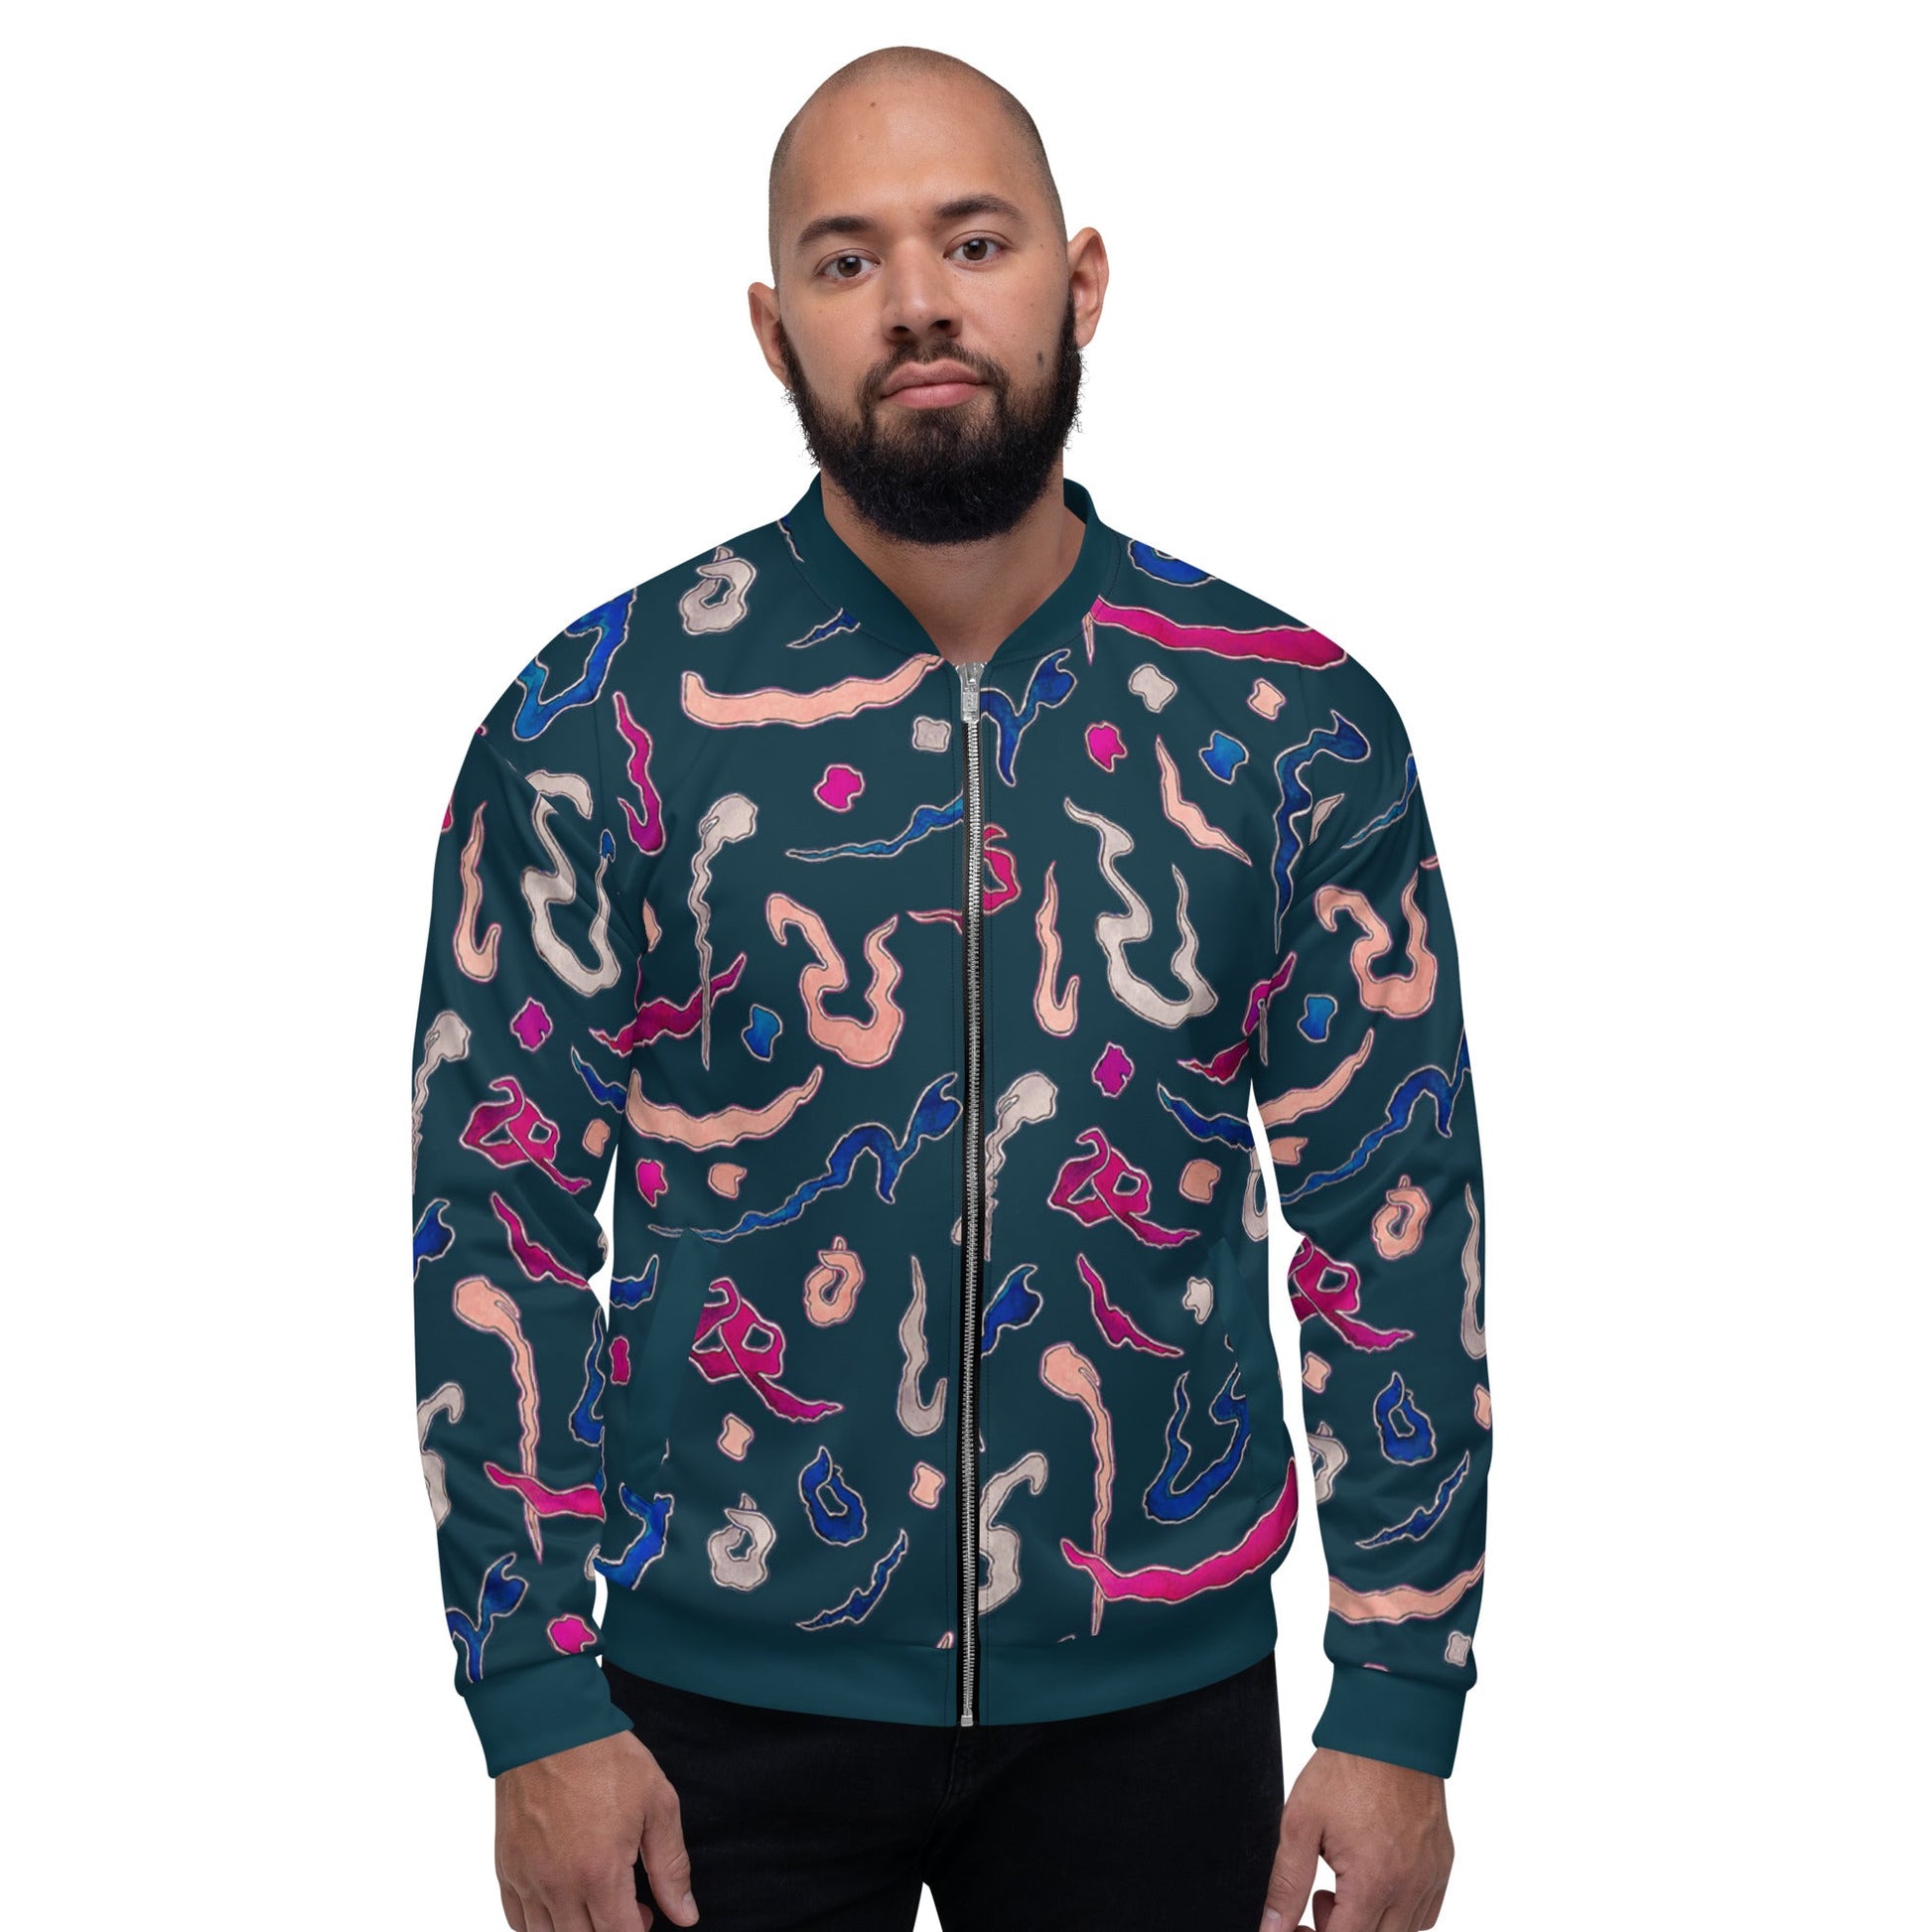 Kindness 3 | All-Over Printed Unisex Bomber Jacket - Bonotee